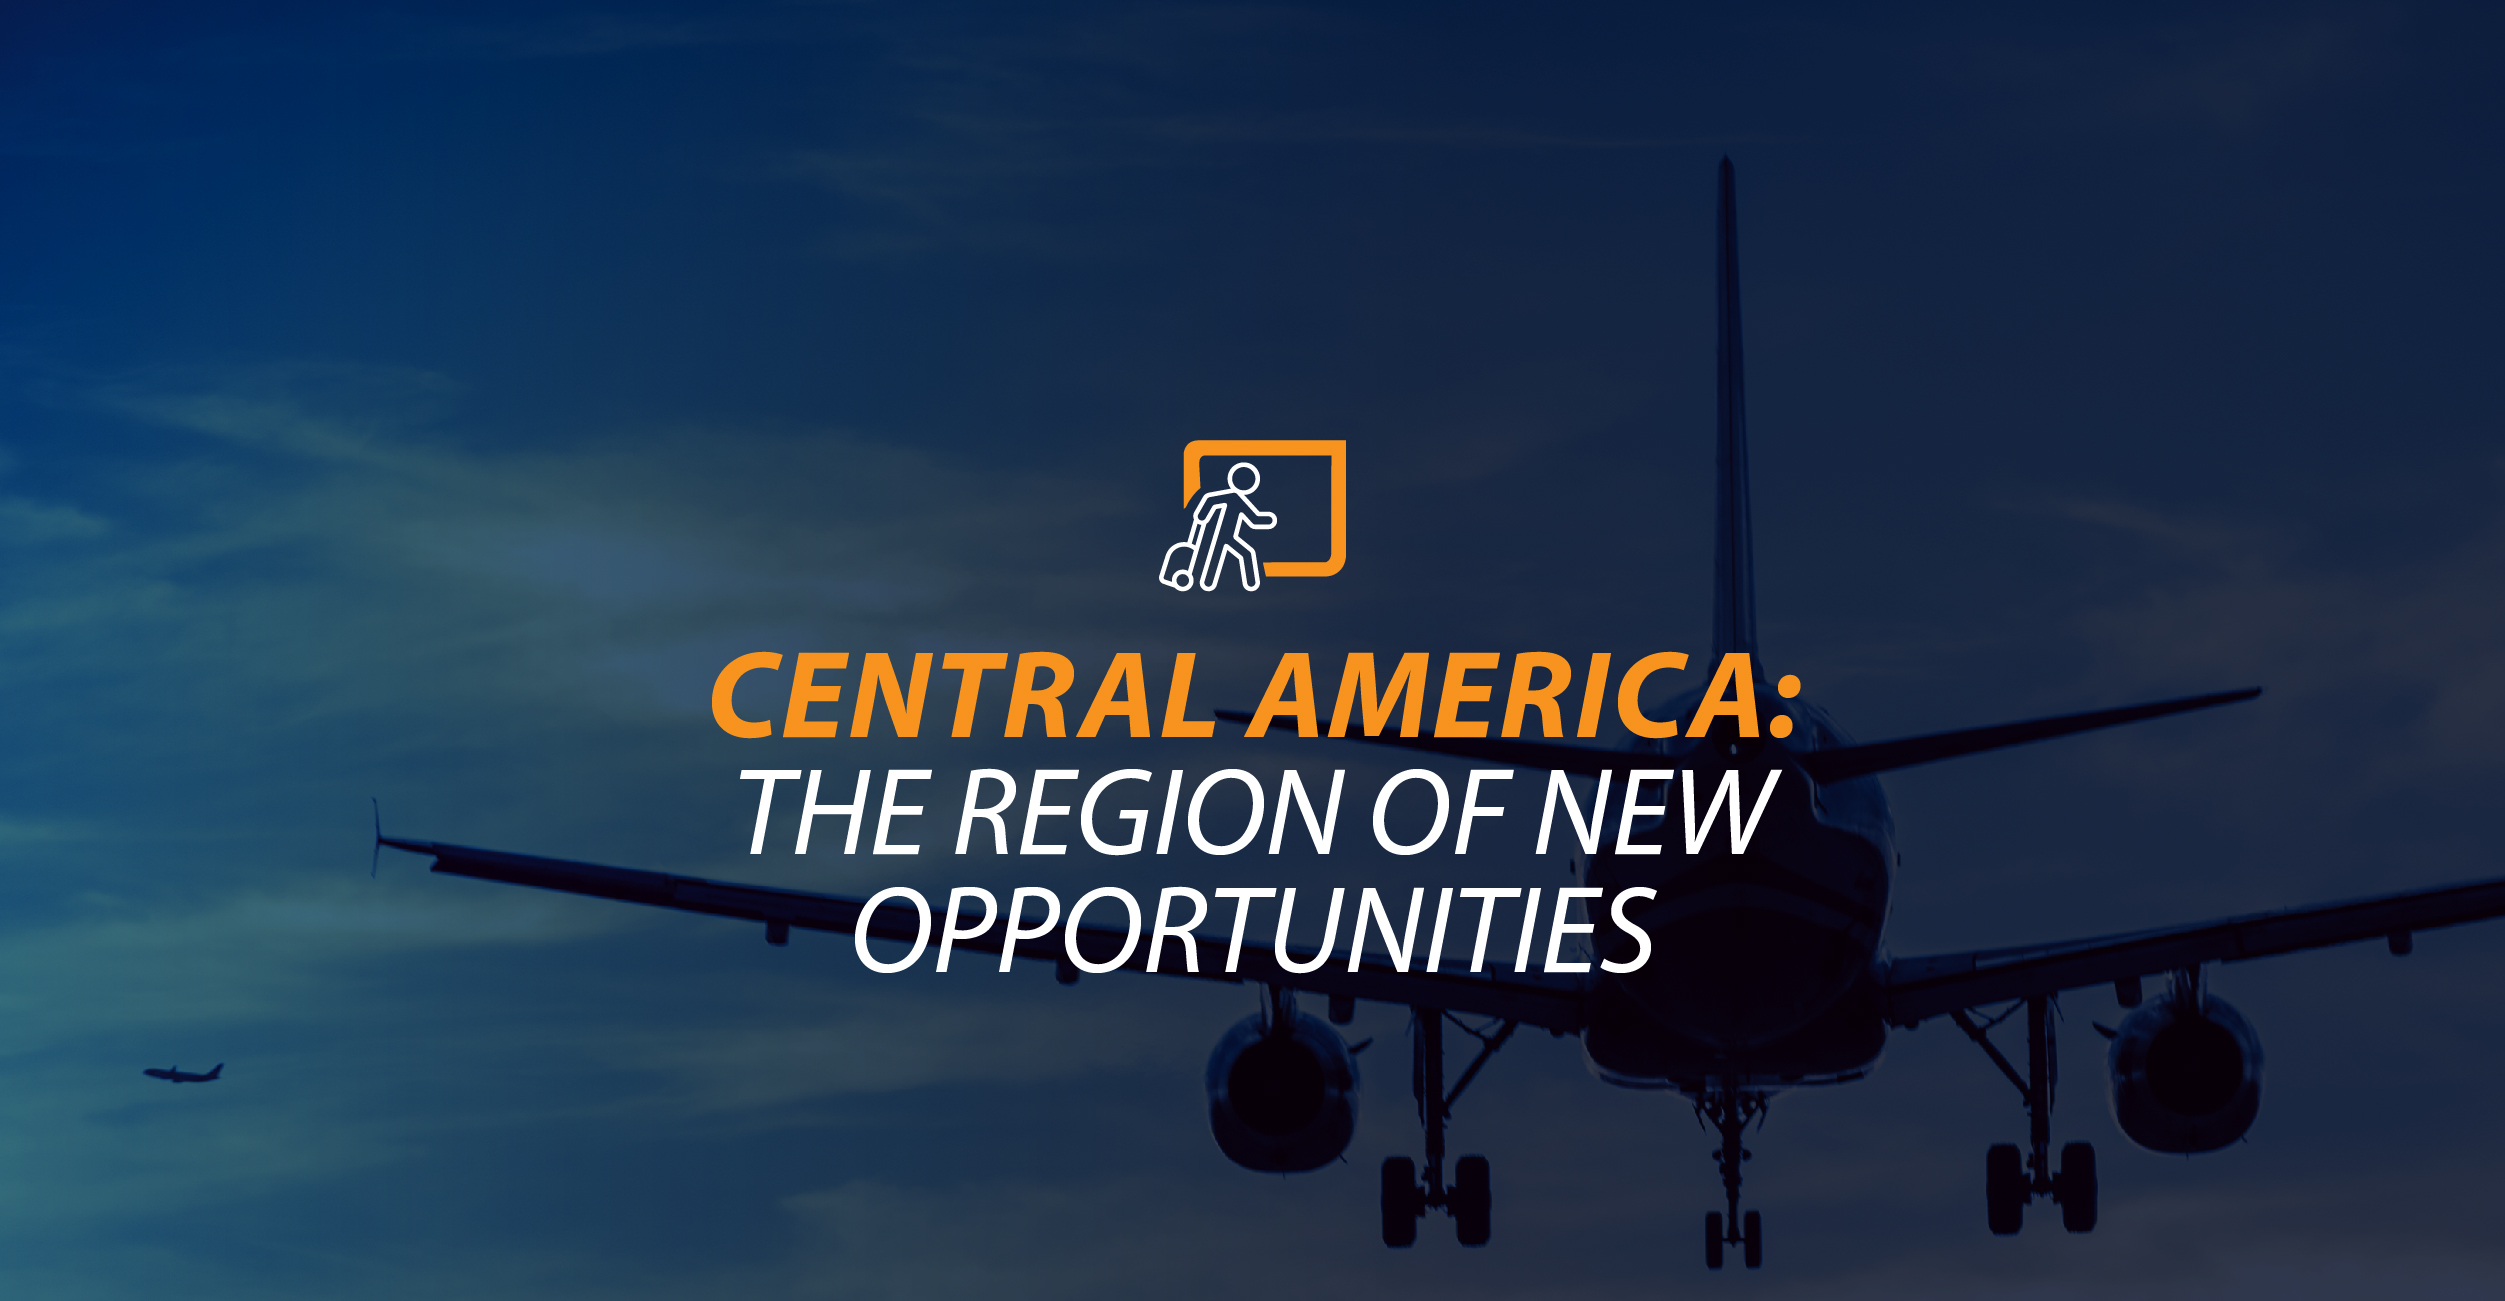 Central America: The region of new opportunities.